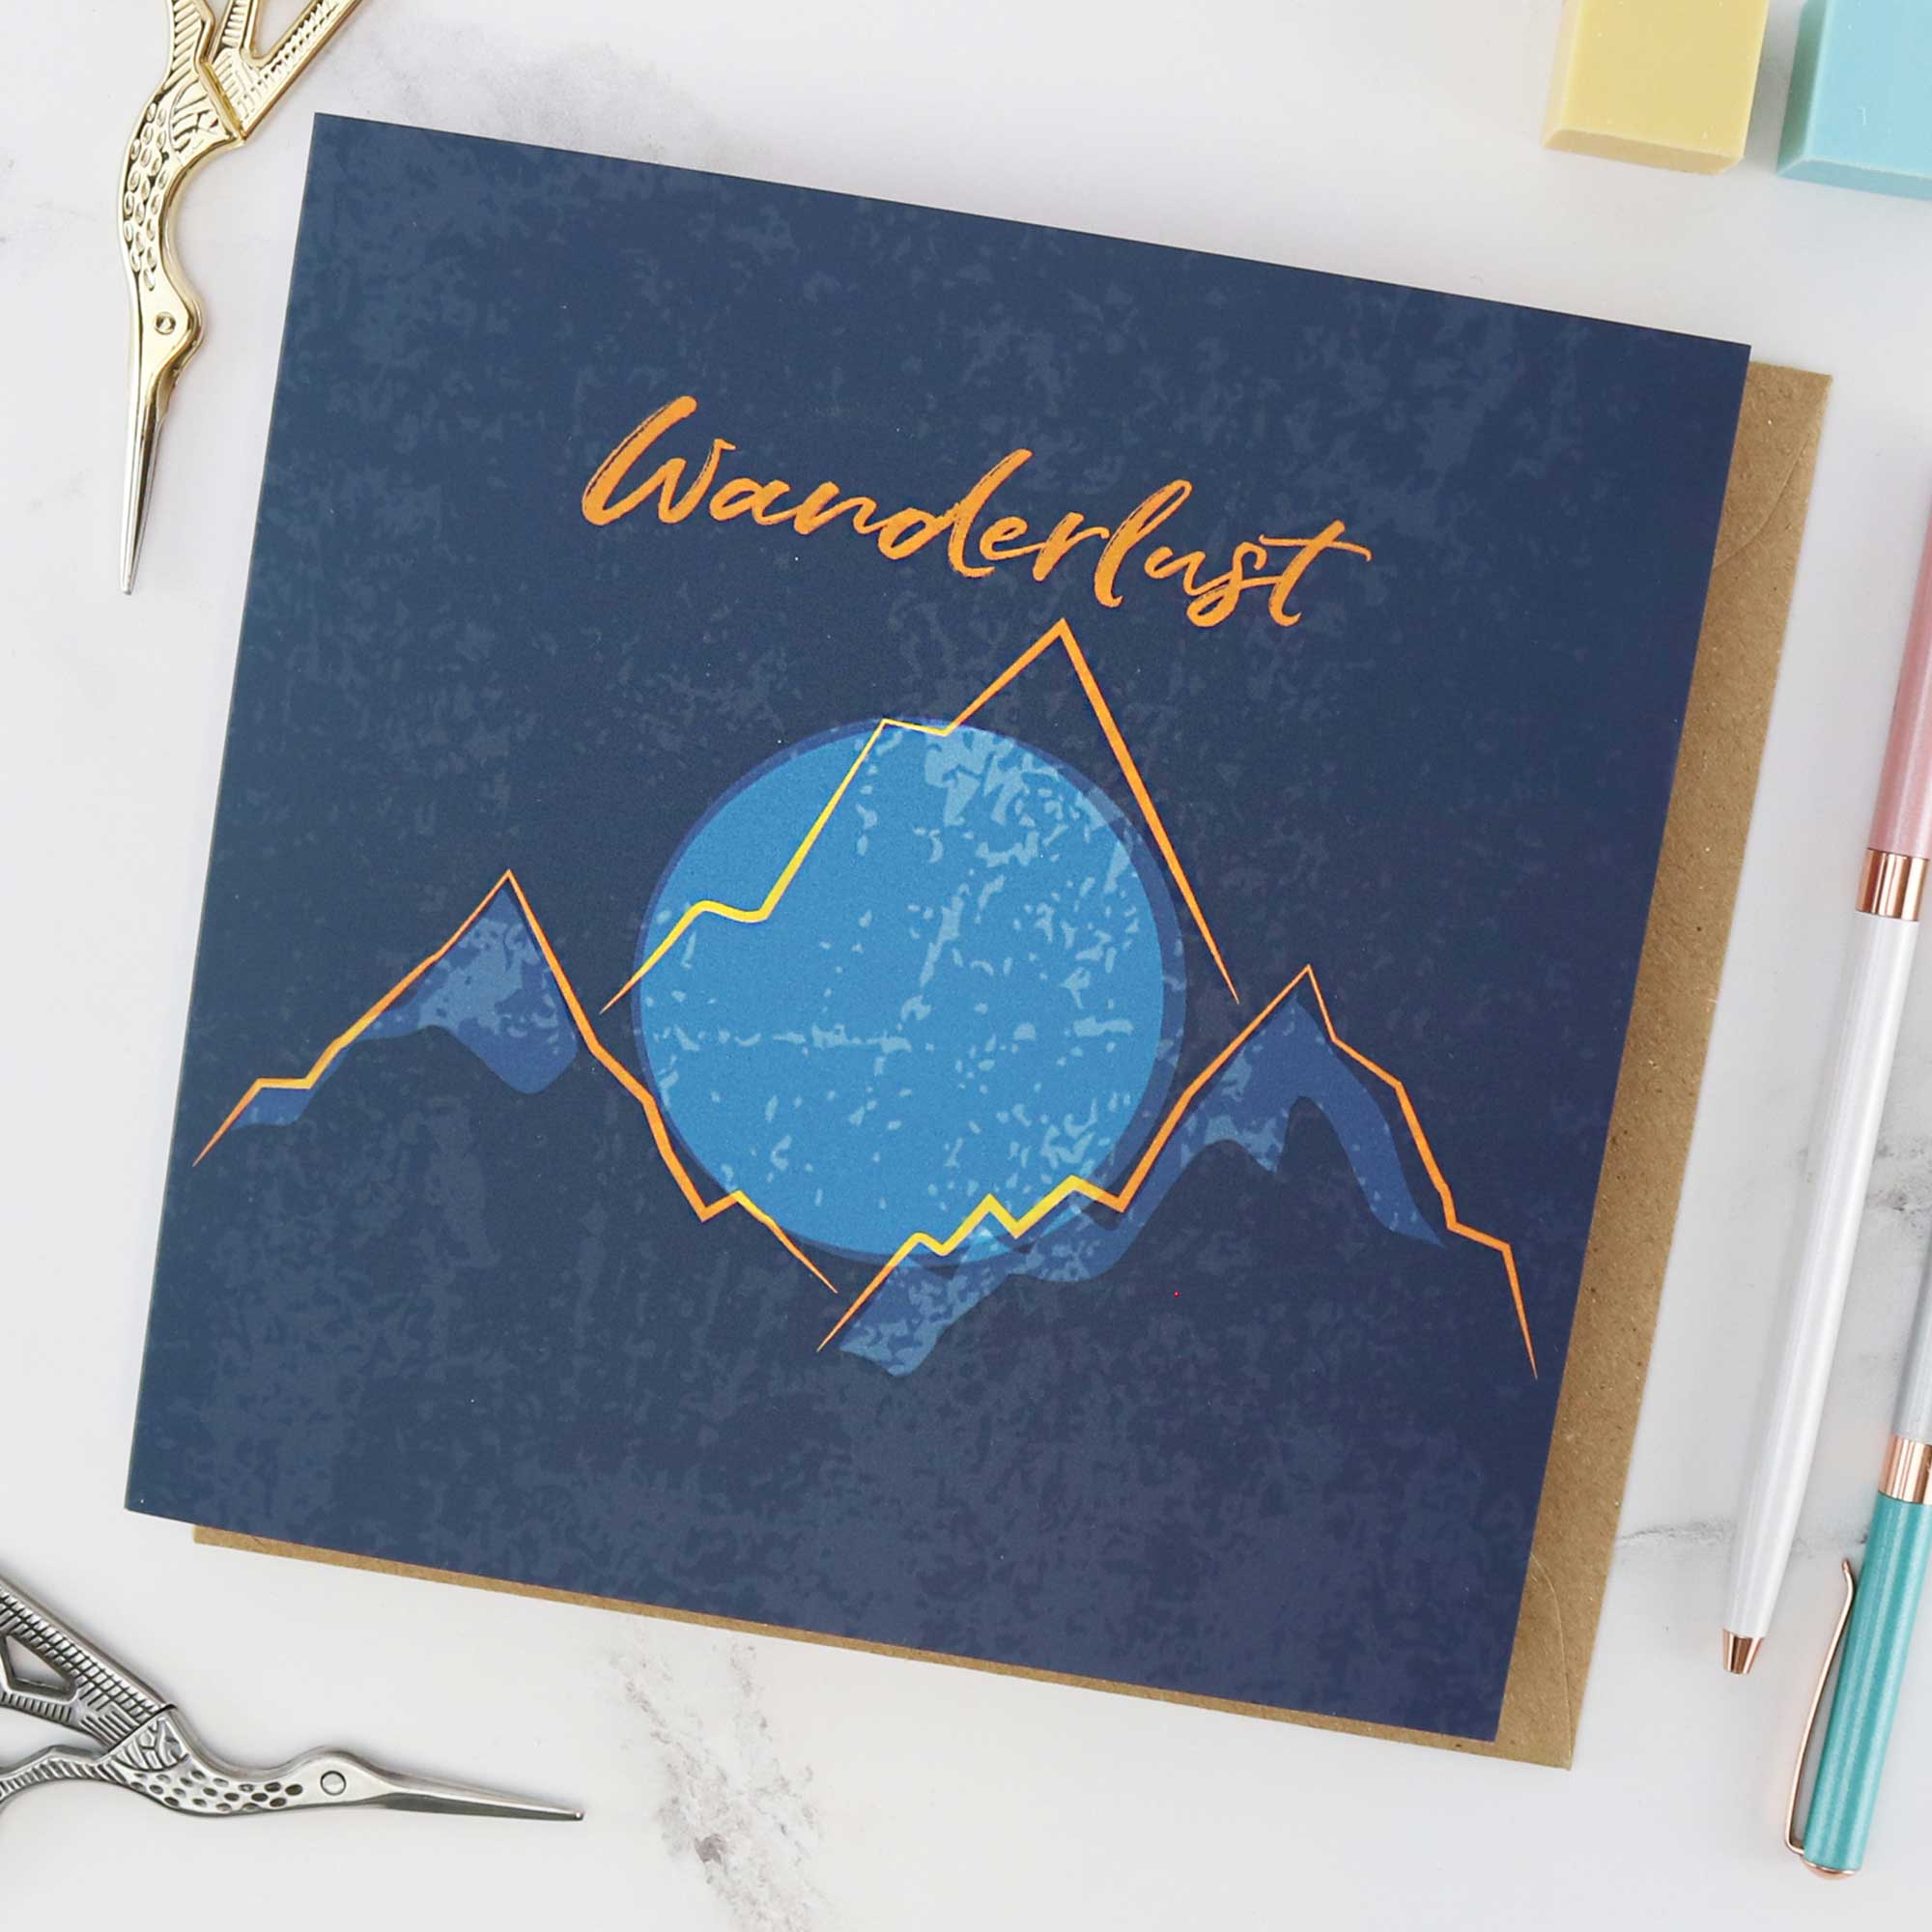 Wanderlust greeting gift card for someone going away travelling